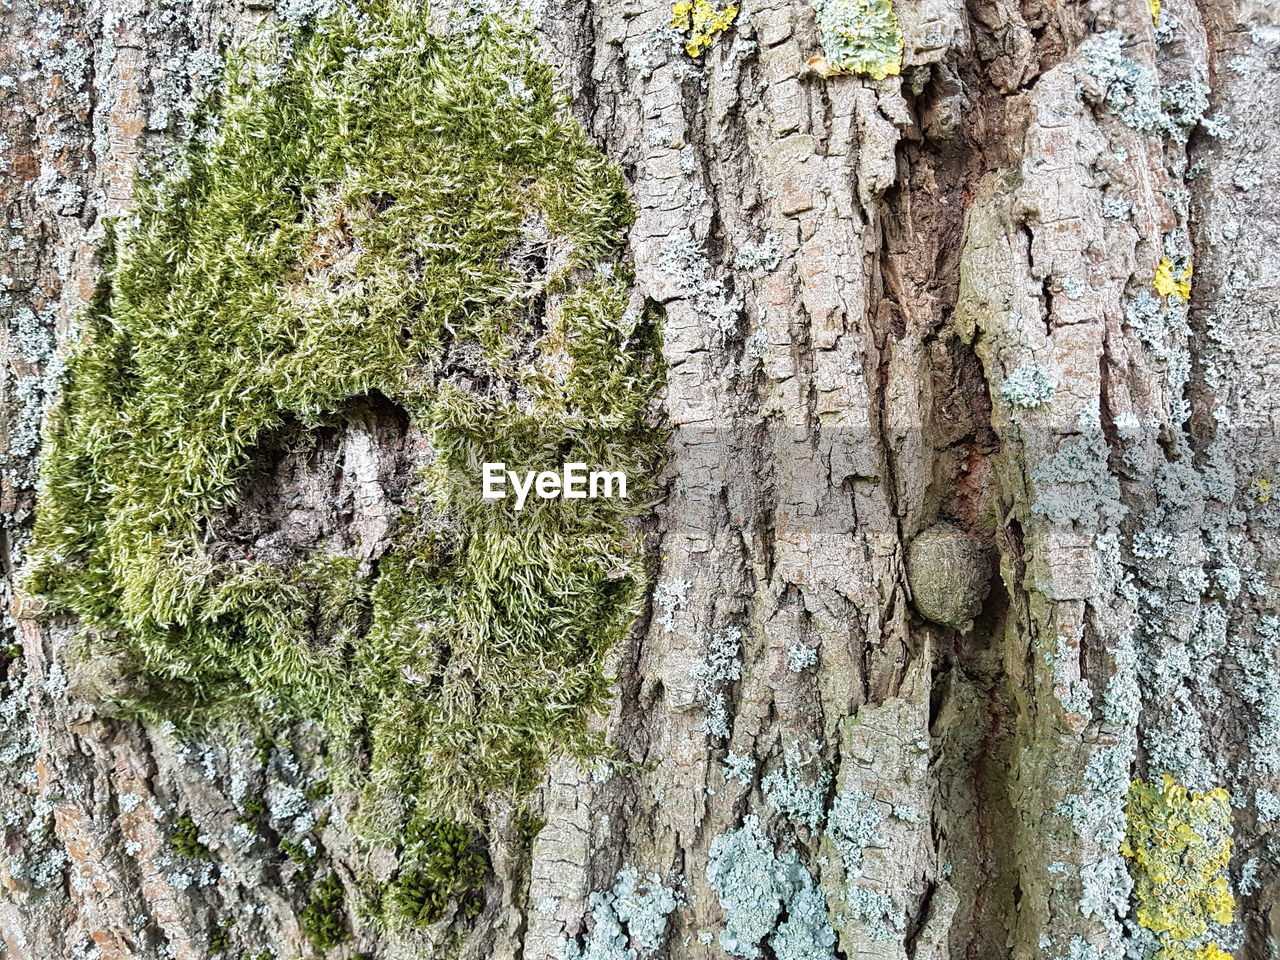 CLOSE-UP OF TREE TRUNK WITH MOSS